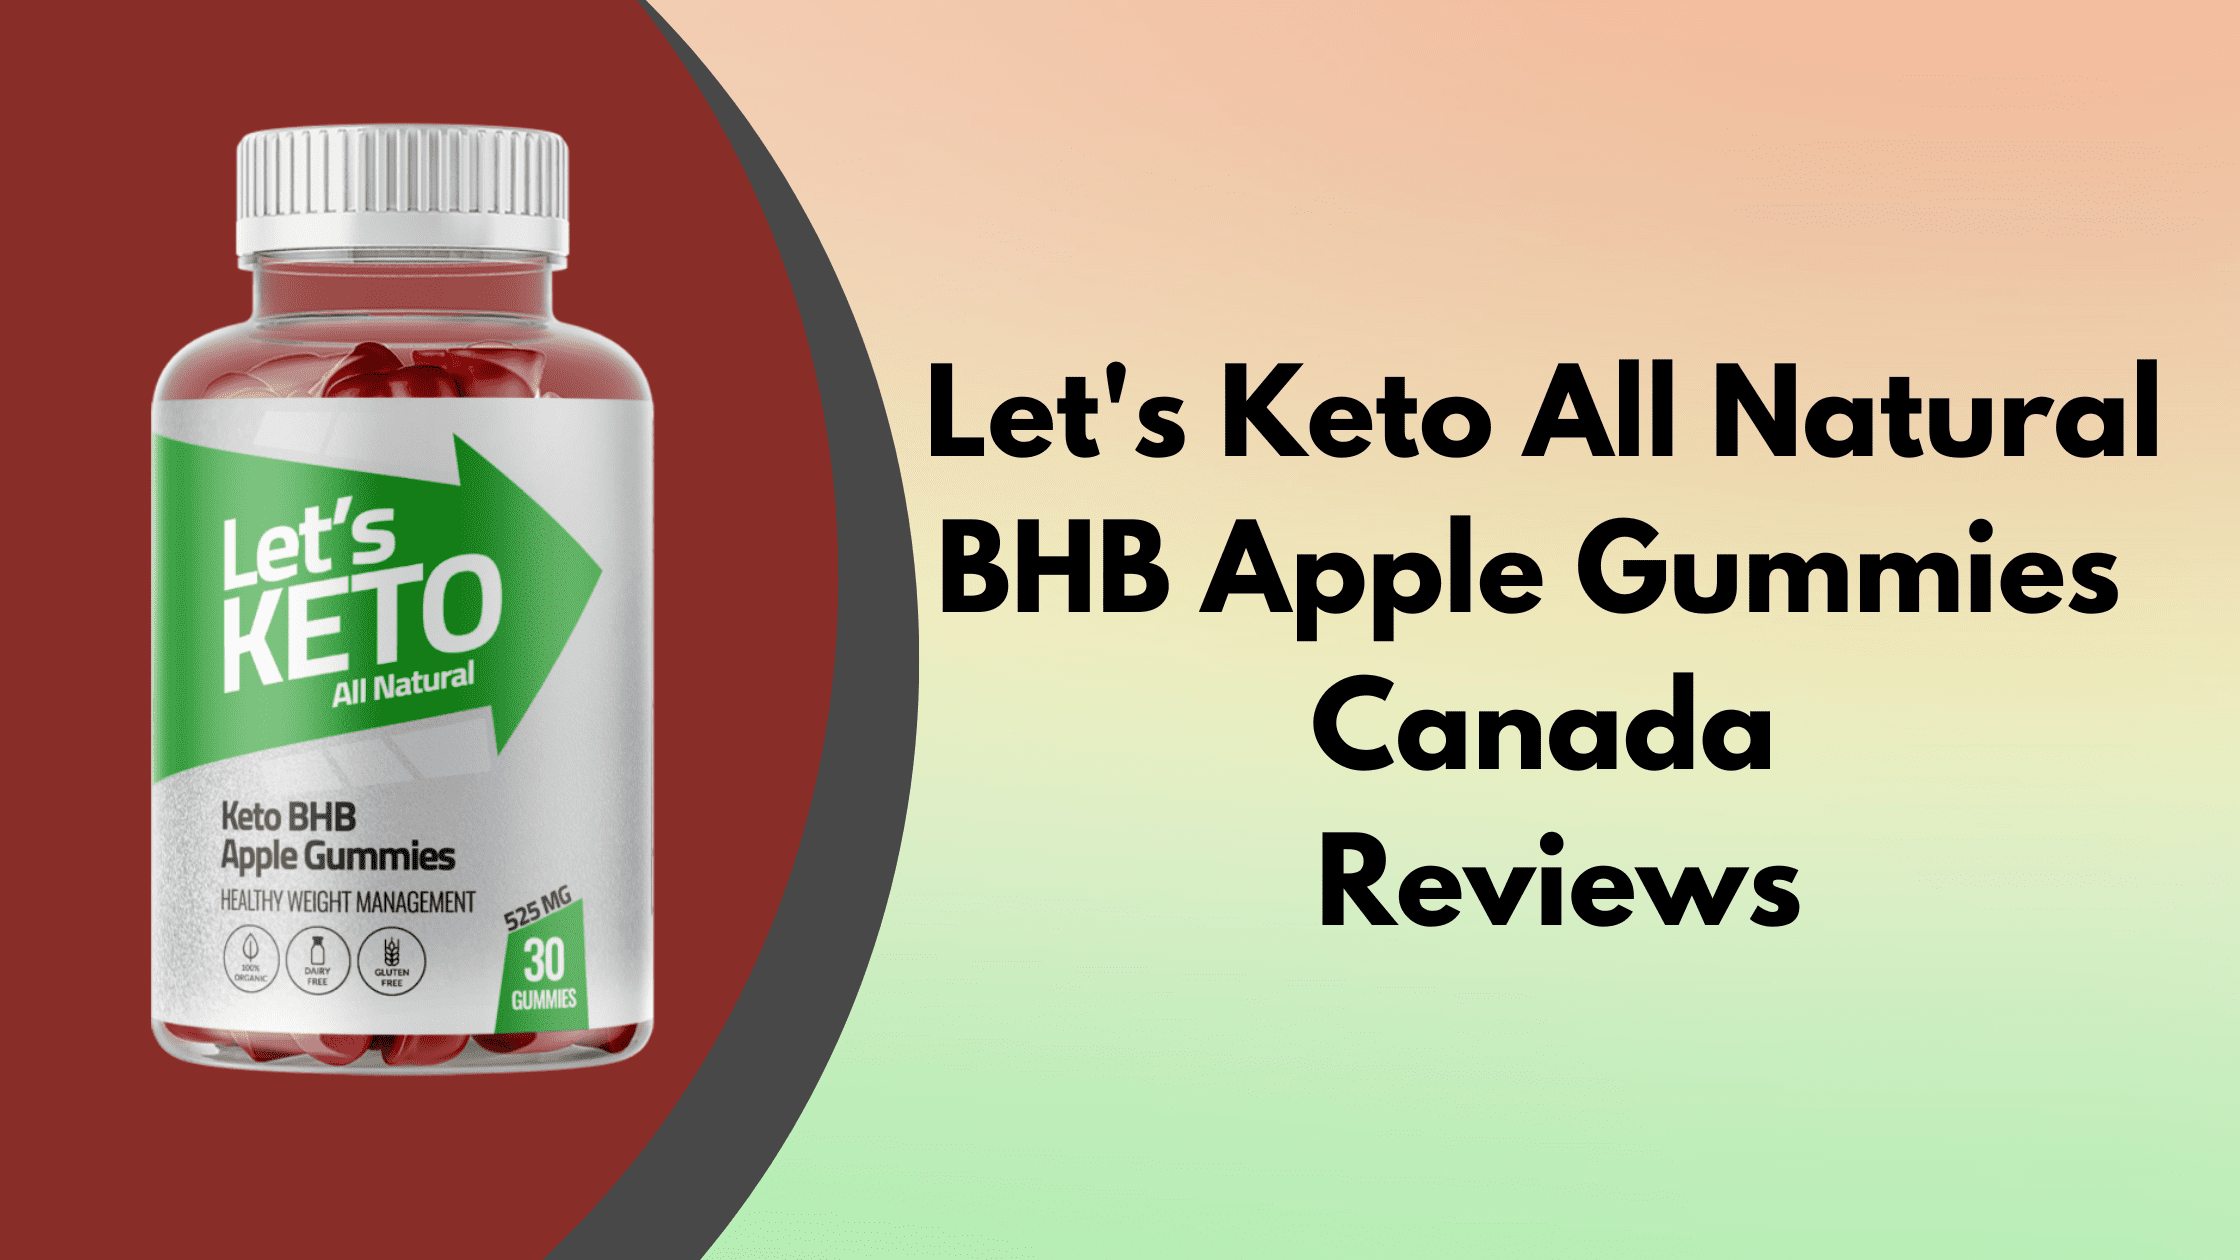 Let's Keto All Natural BHB Apple Gummies Canada Reviews - Is This Safe?